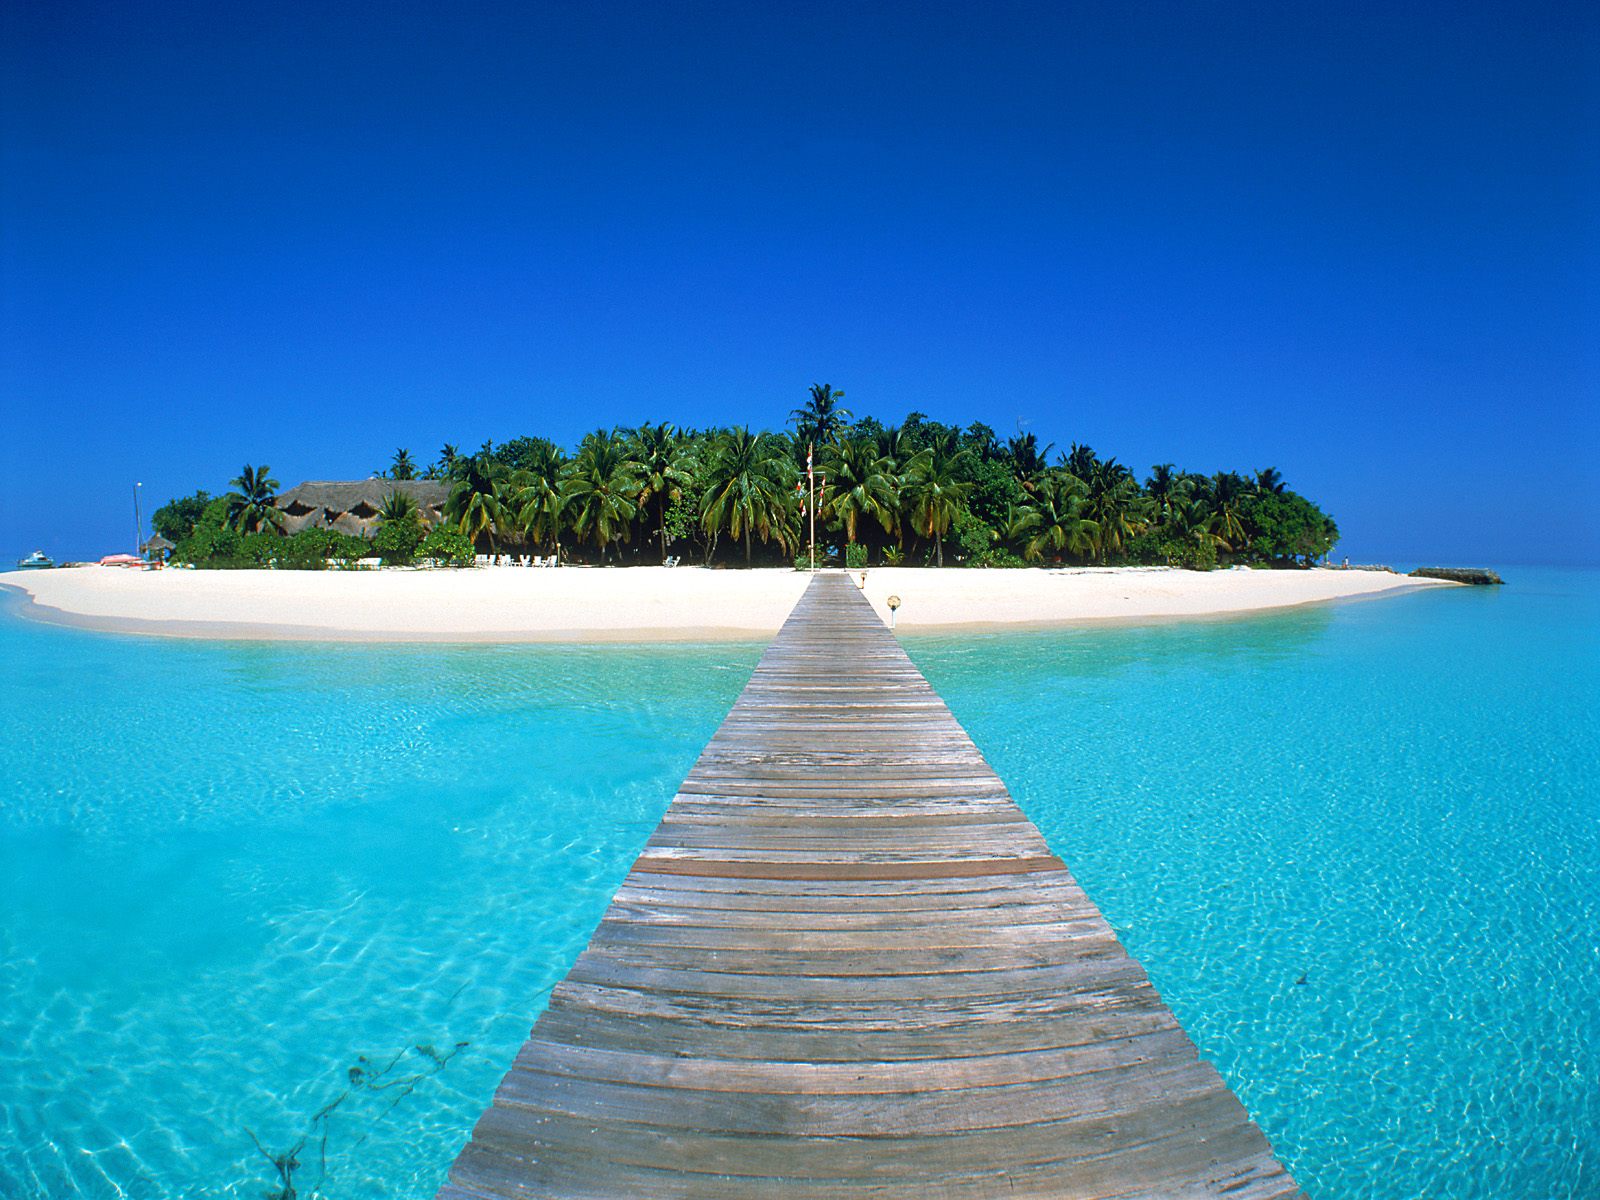 Maldives Most Beautiful Beaches in the World 2013 Wallpapers 1600x1200